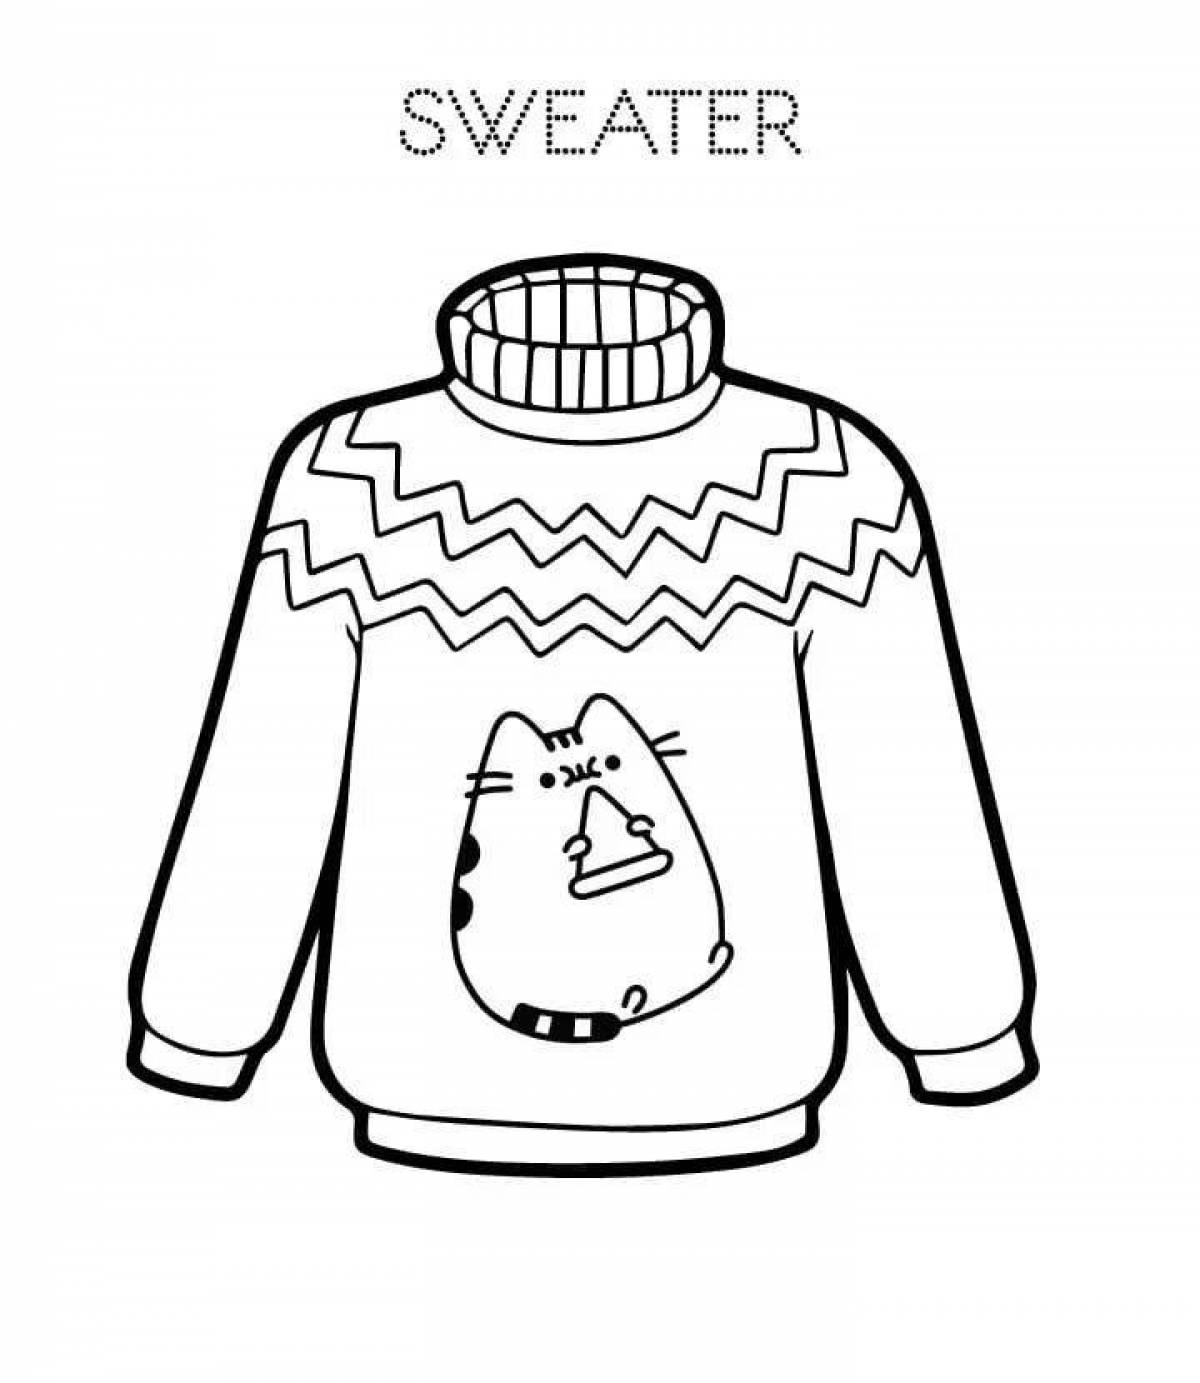 Pretty sweater coloring book for 4-5 year olds